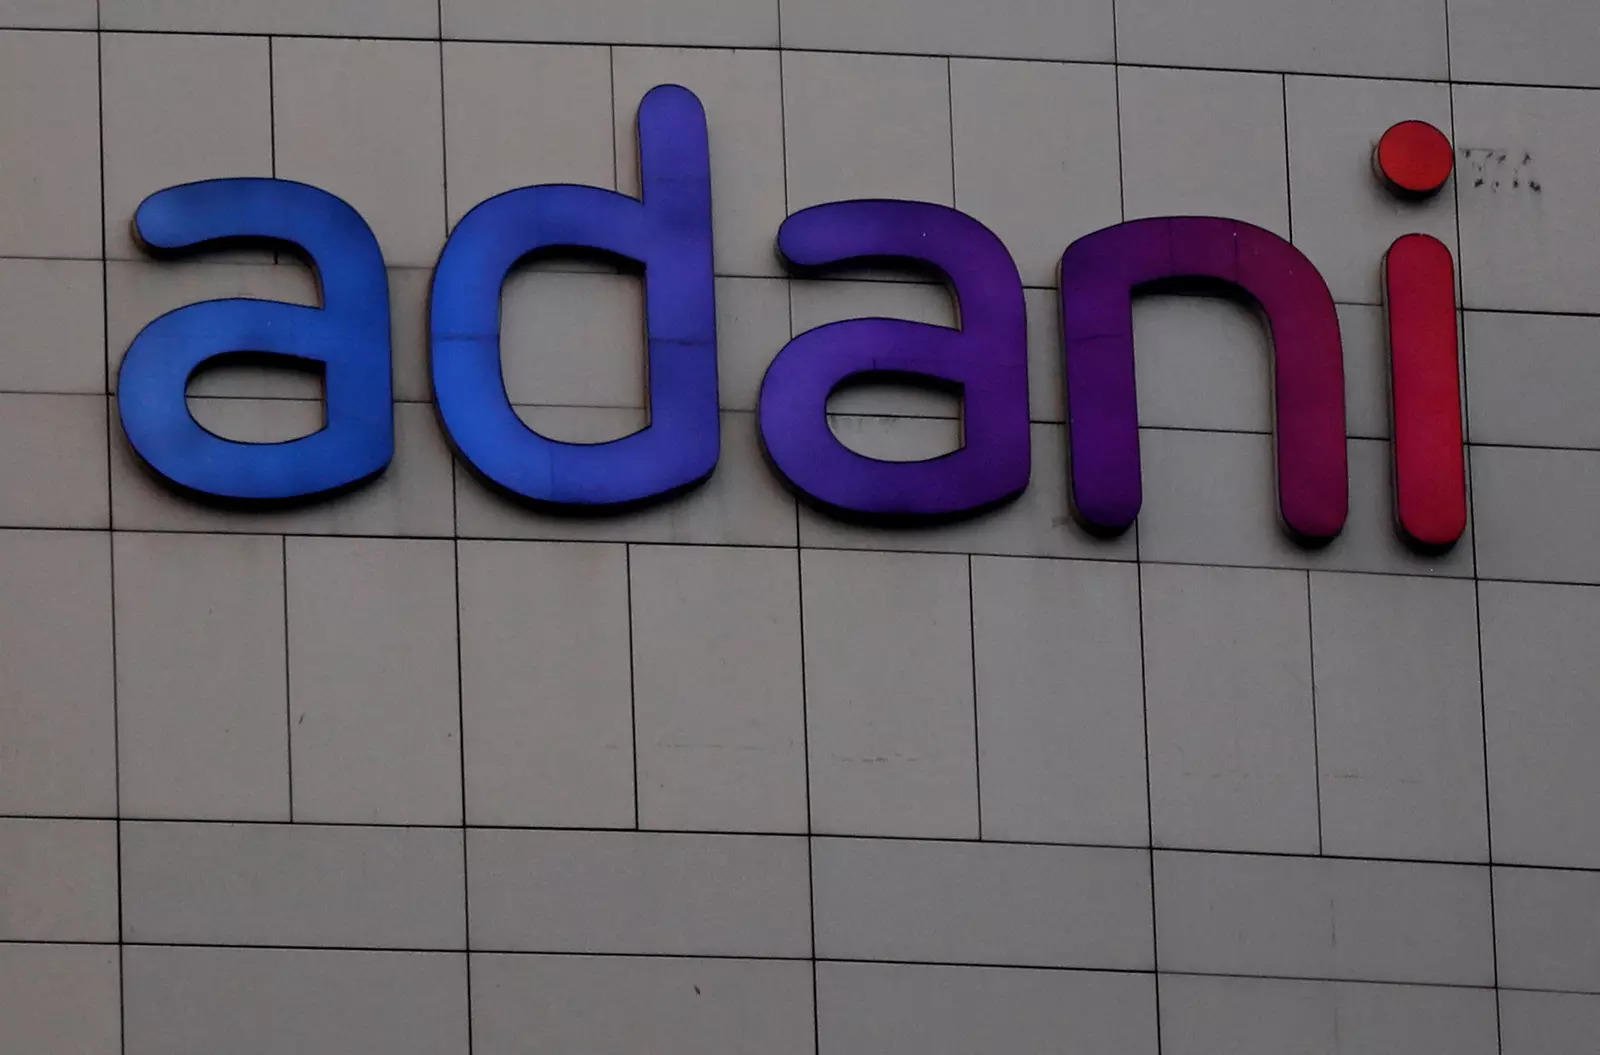 'Calculated attack on India, its institutions': Adani Group on Hindenburg allegations